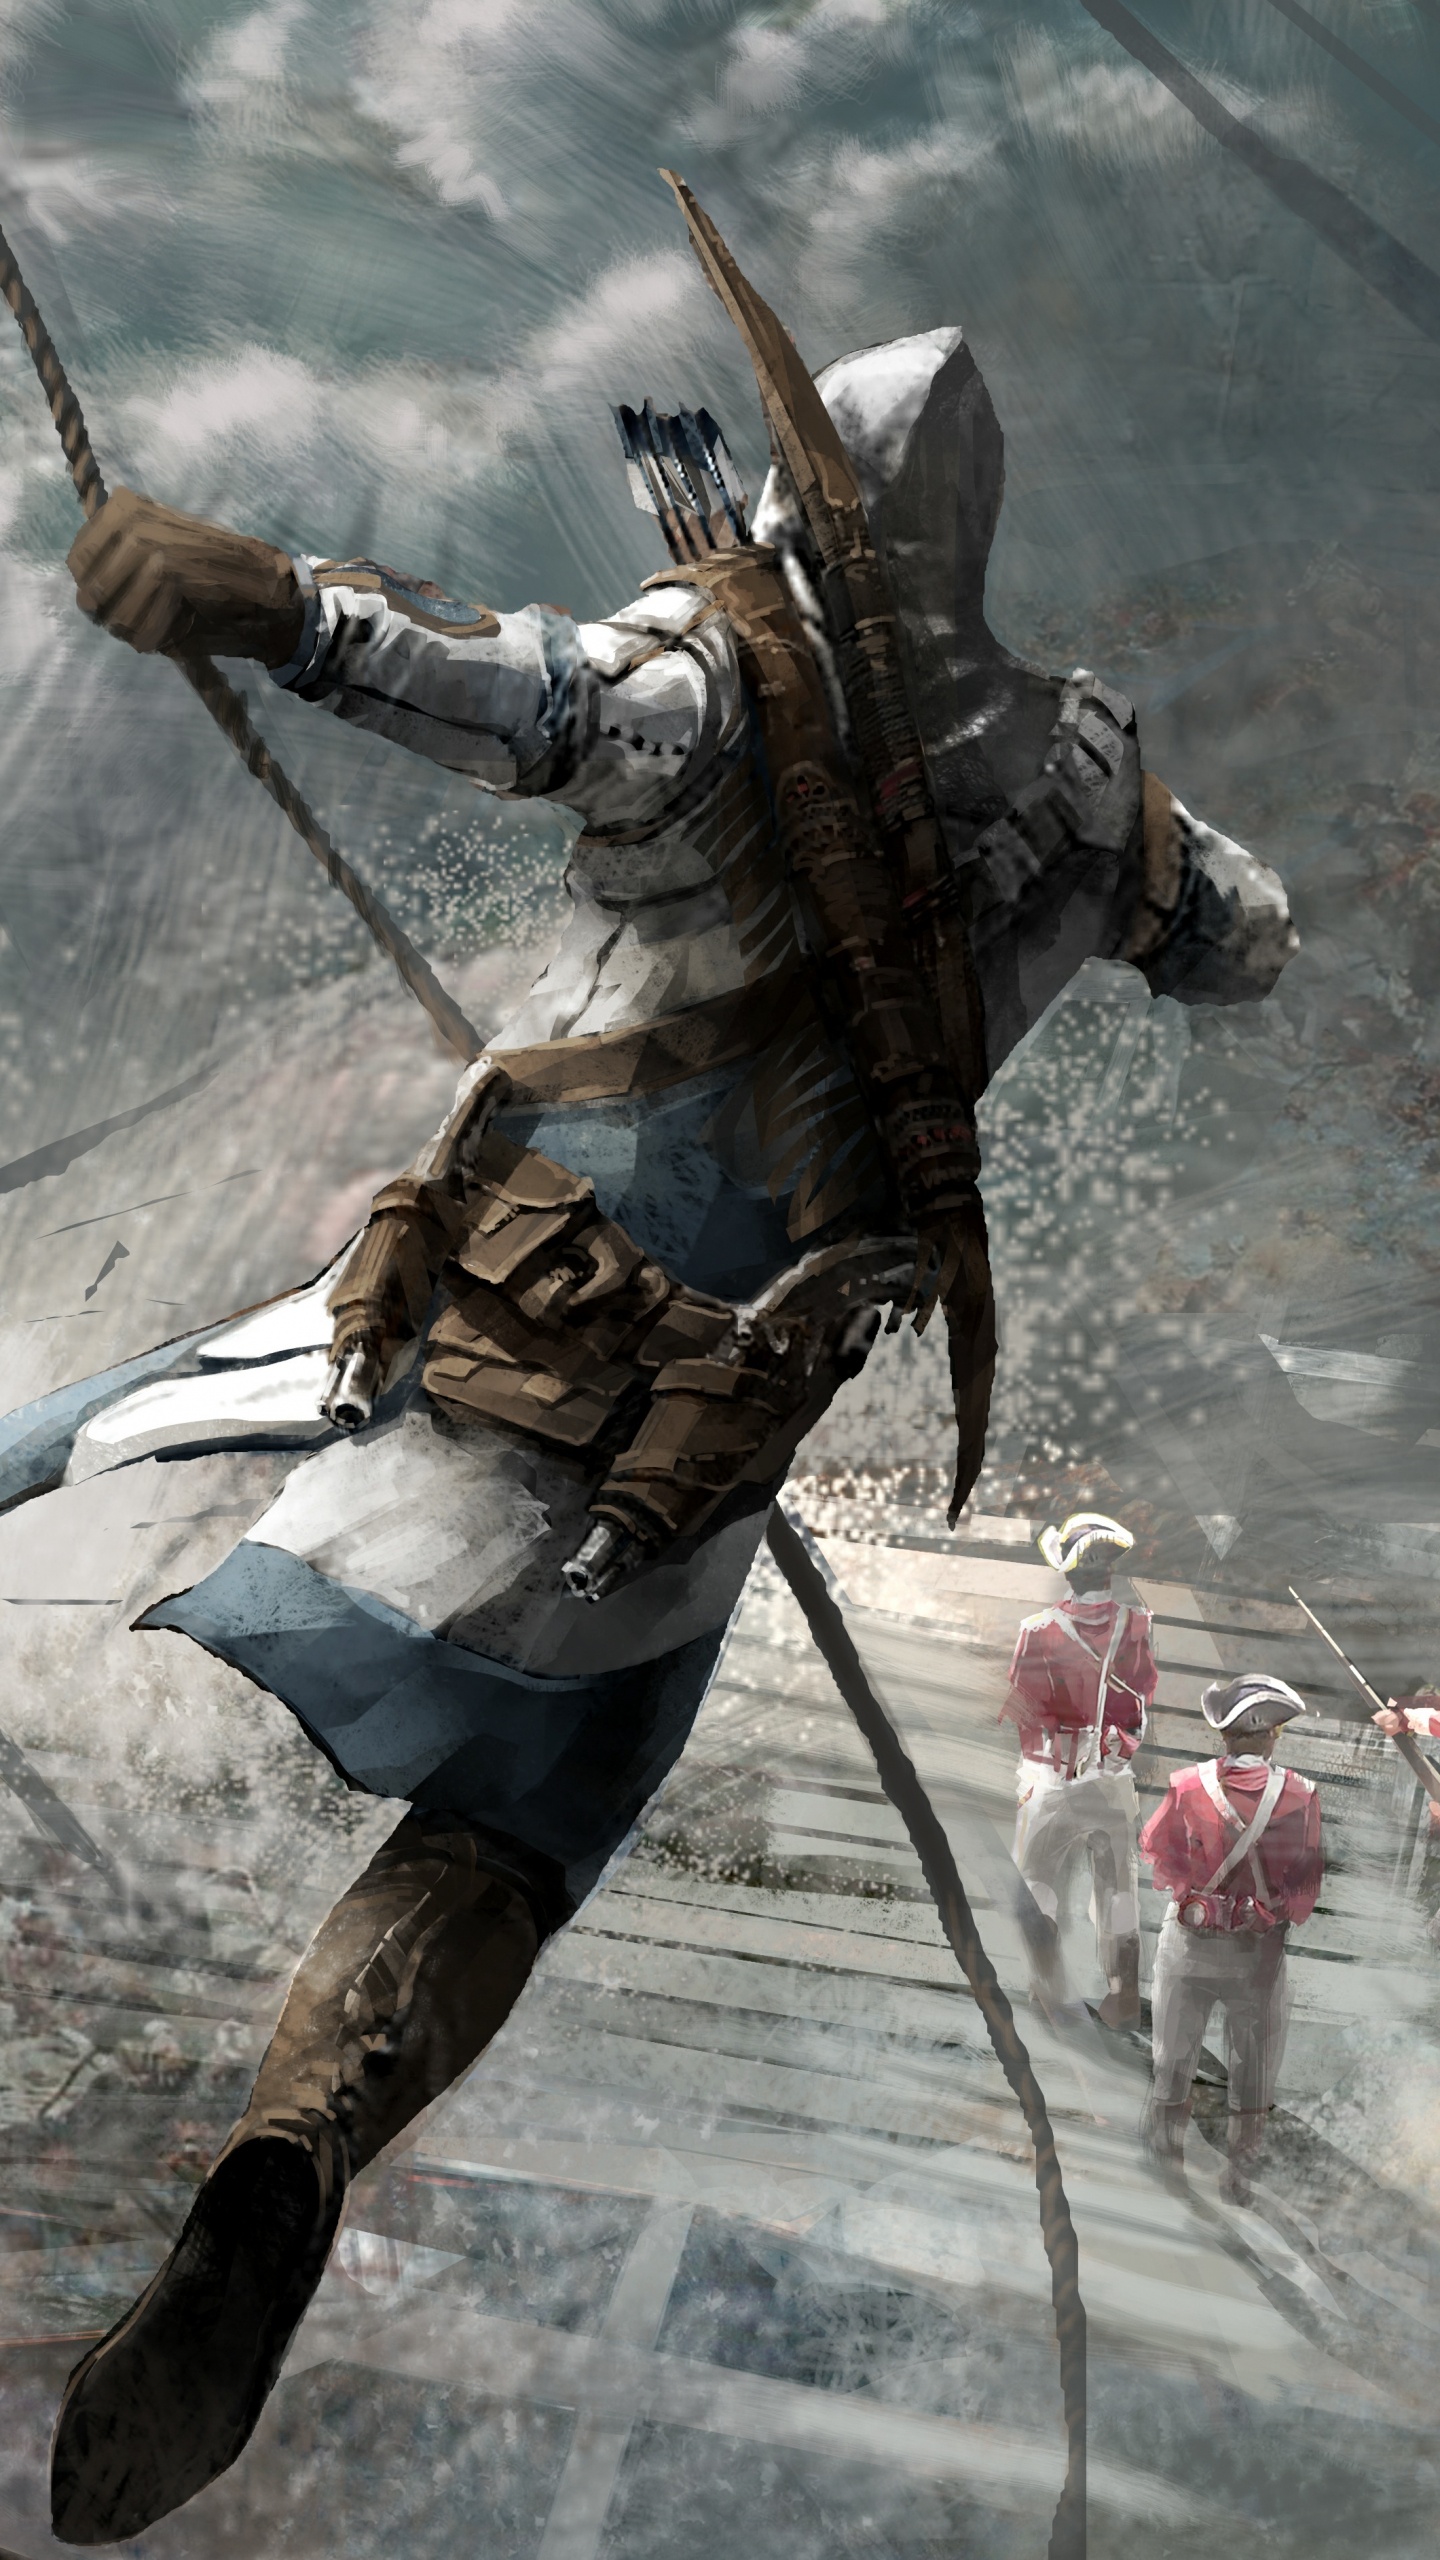 Assassins Creed III, Assassins Creed, Ezio Auditore, Connor Kenway, Ubisoft. Wallpaper in 1440x2560 Resolution